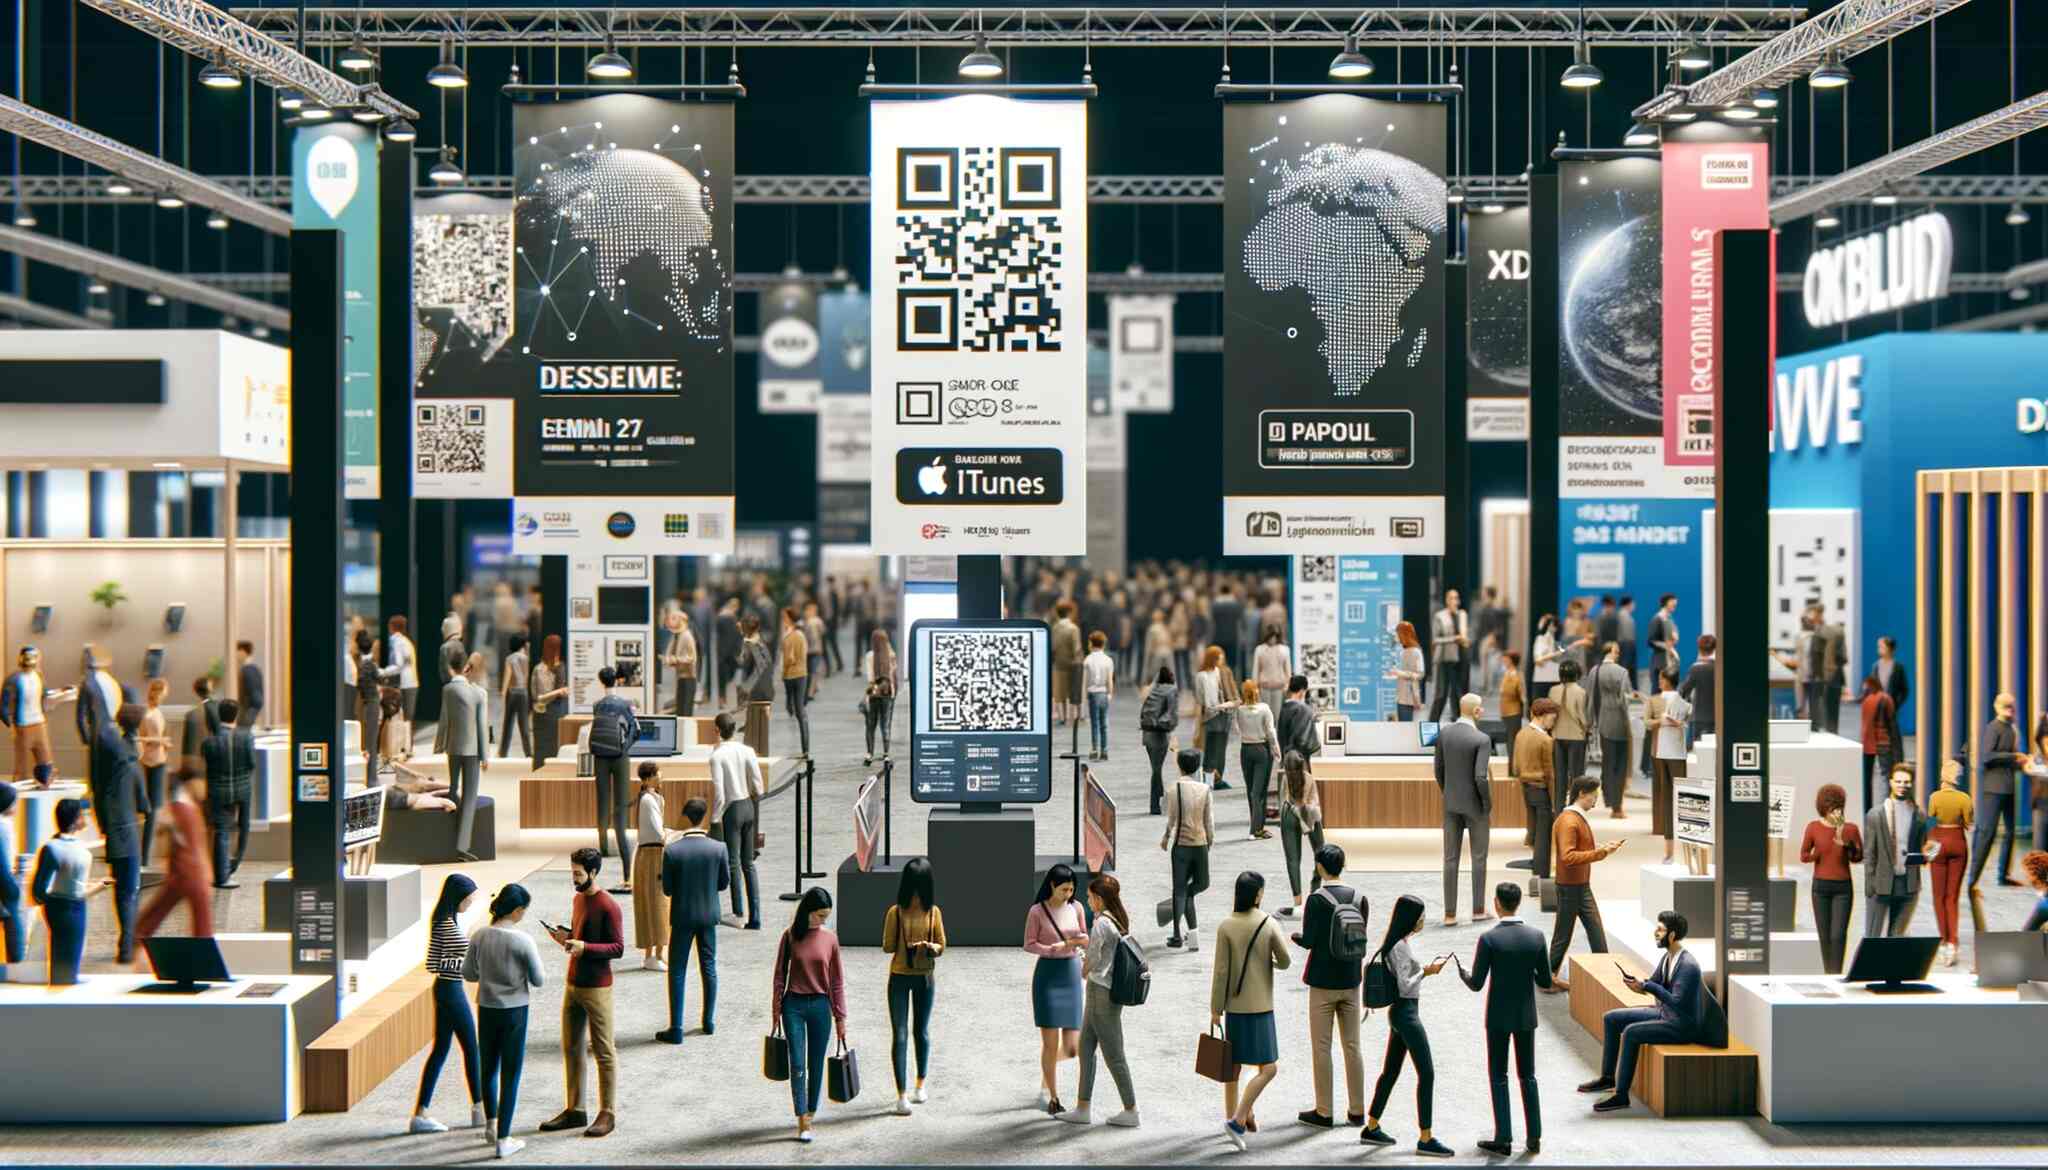 How to Use QR Codes on Banners Effectively